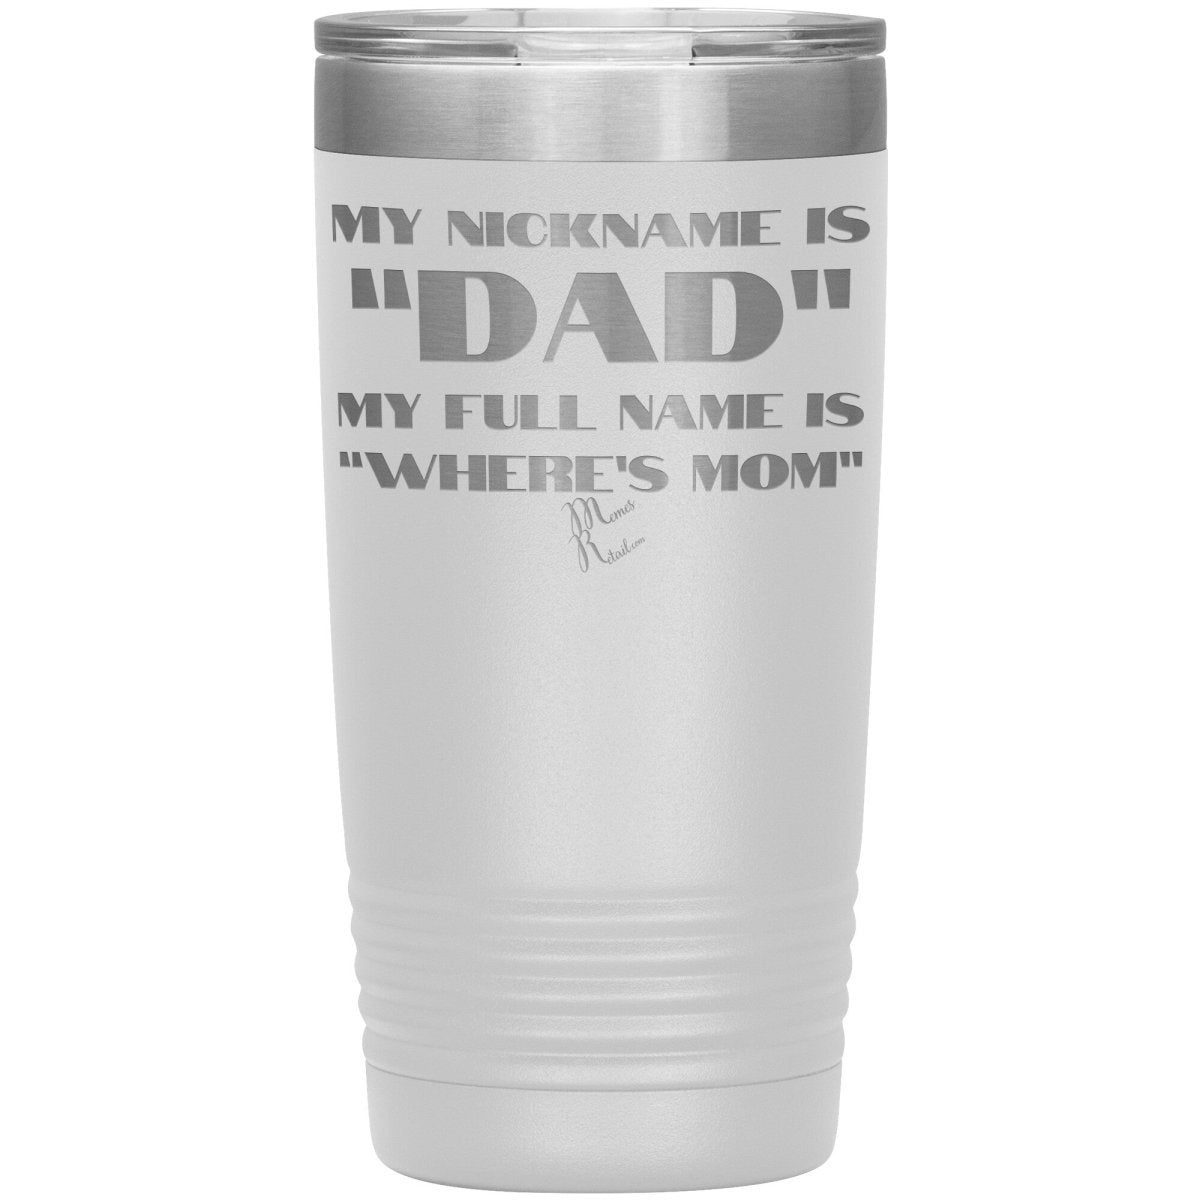 My Nickname is "Dad", My Full Name is "Where's Mom" Tumblers, 20oz Insulated Tumbler / White - MemesRetail.com